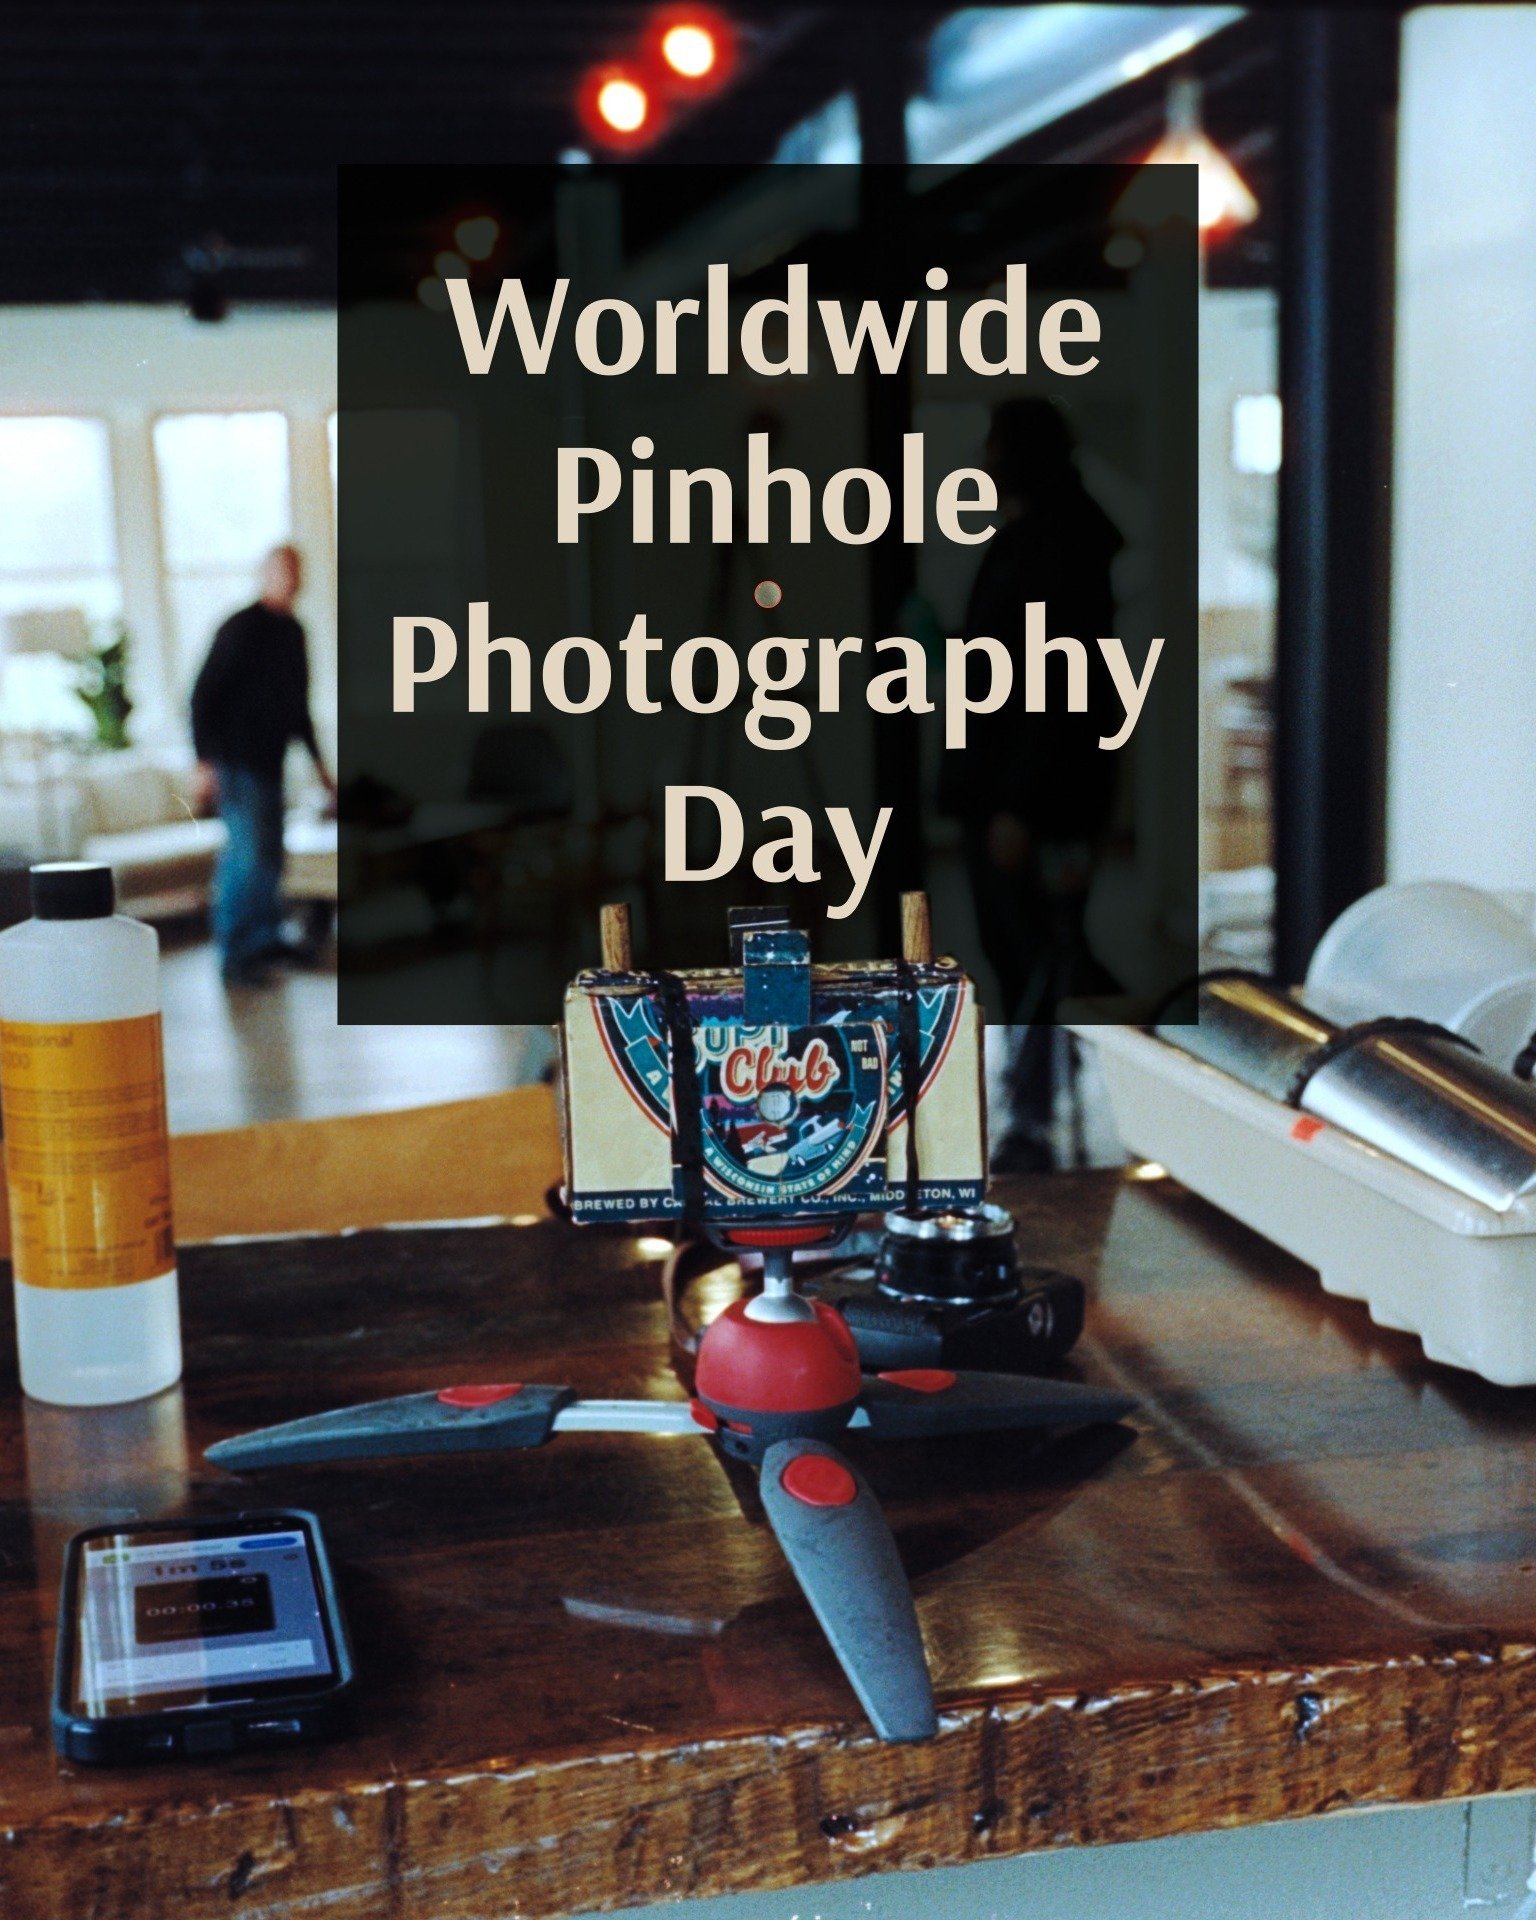 📸✨ Happy World Pinhole Photography Day! 🌍 Today, we celebrate the art and history of pinhole photography, a technique that has fascinated artists and scientists for centuries. Today is all about the magic of capturing moments through the simplest o